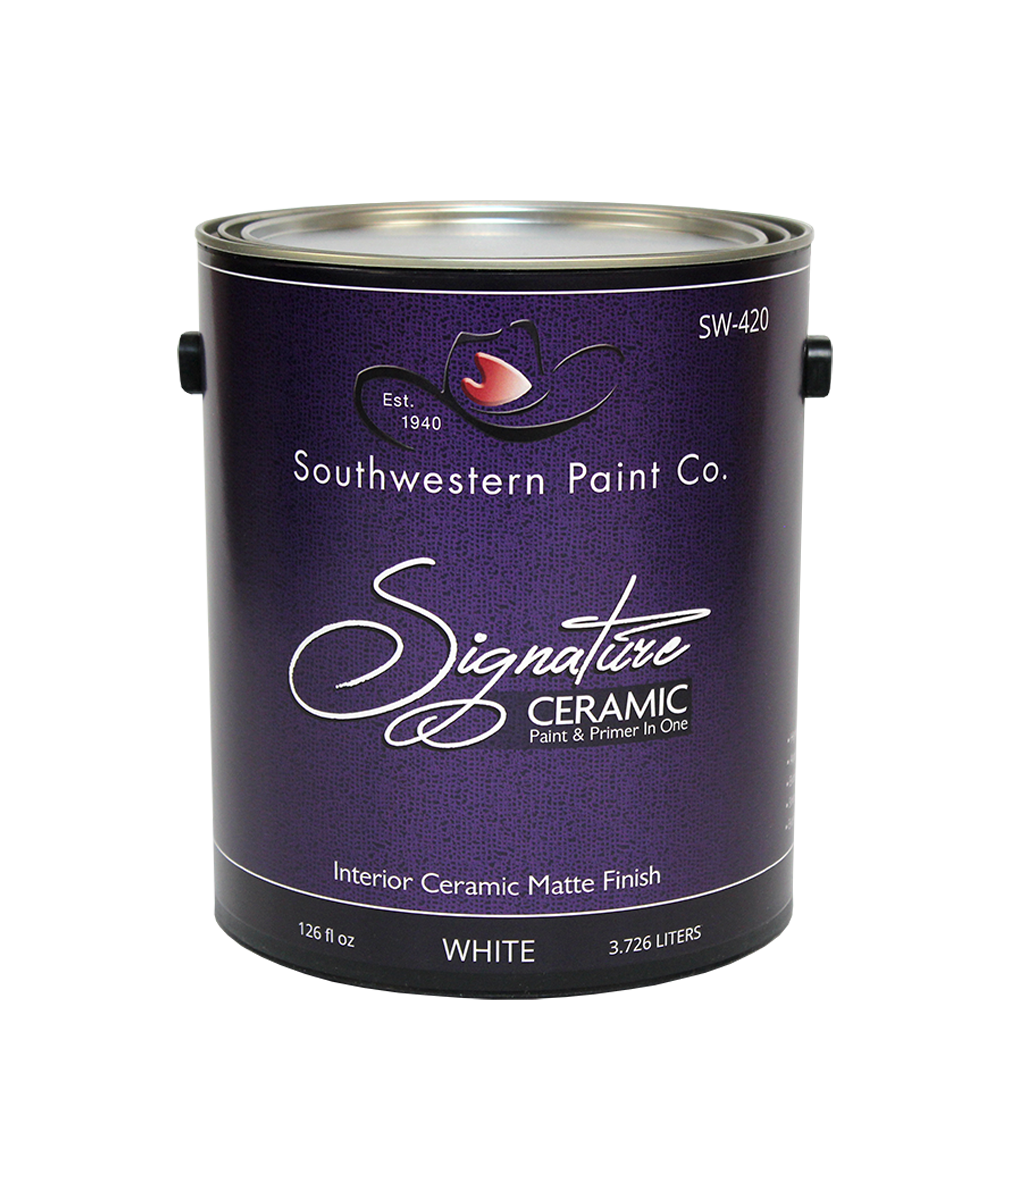 Signature Ceramic Paint, available at Southwestern Paint in Houston, TX.